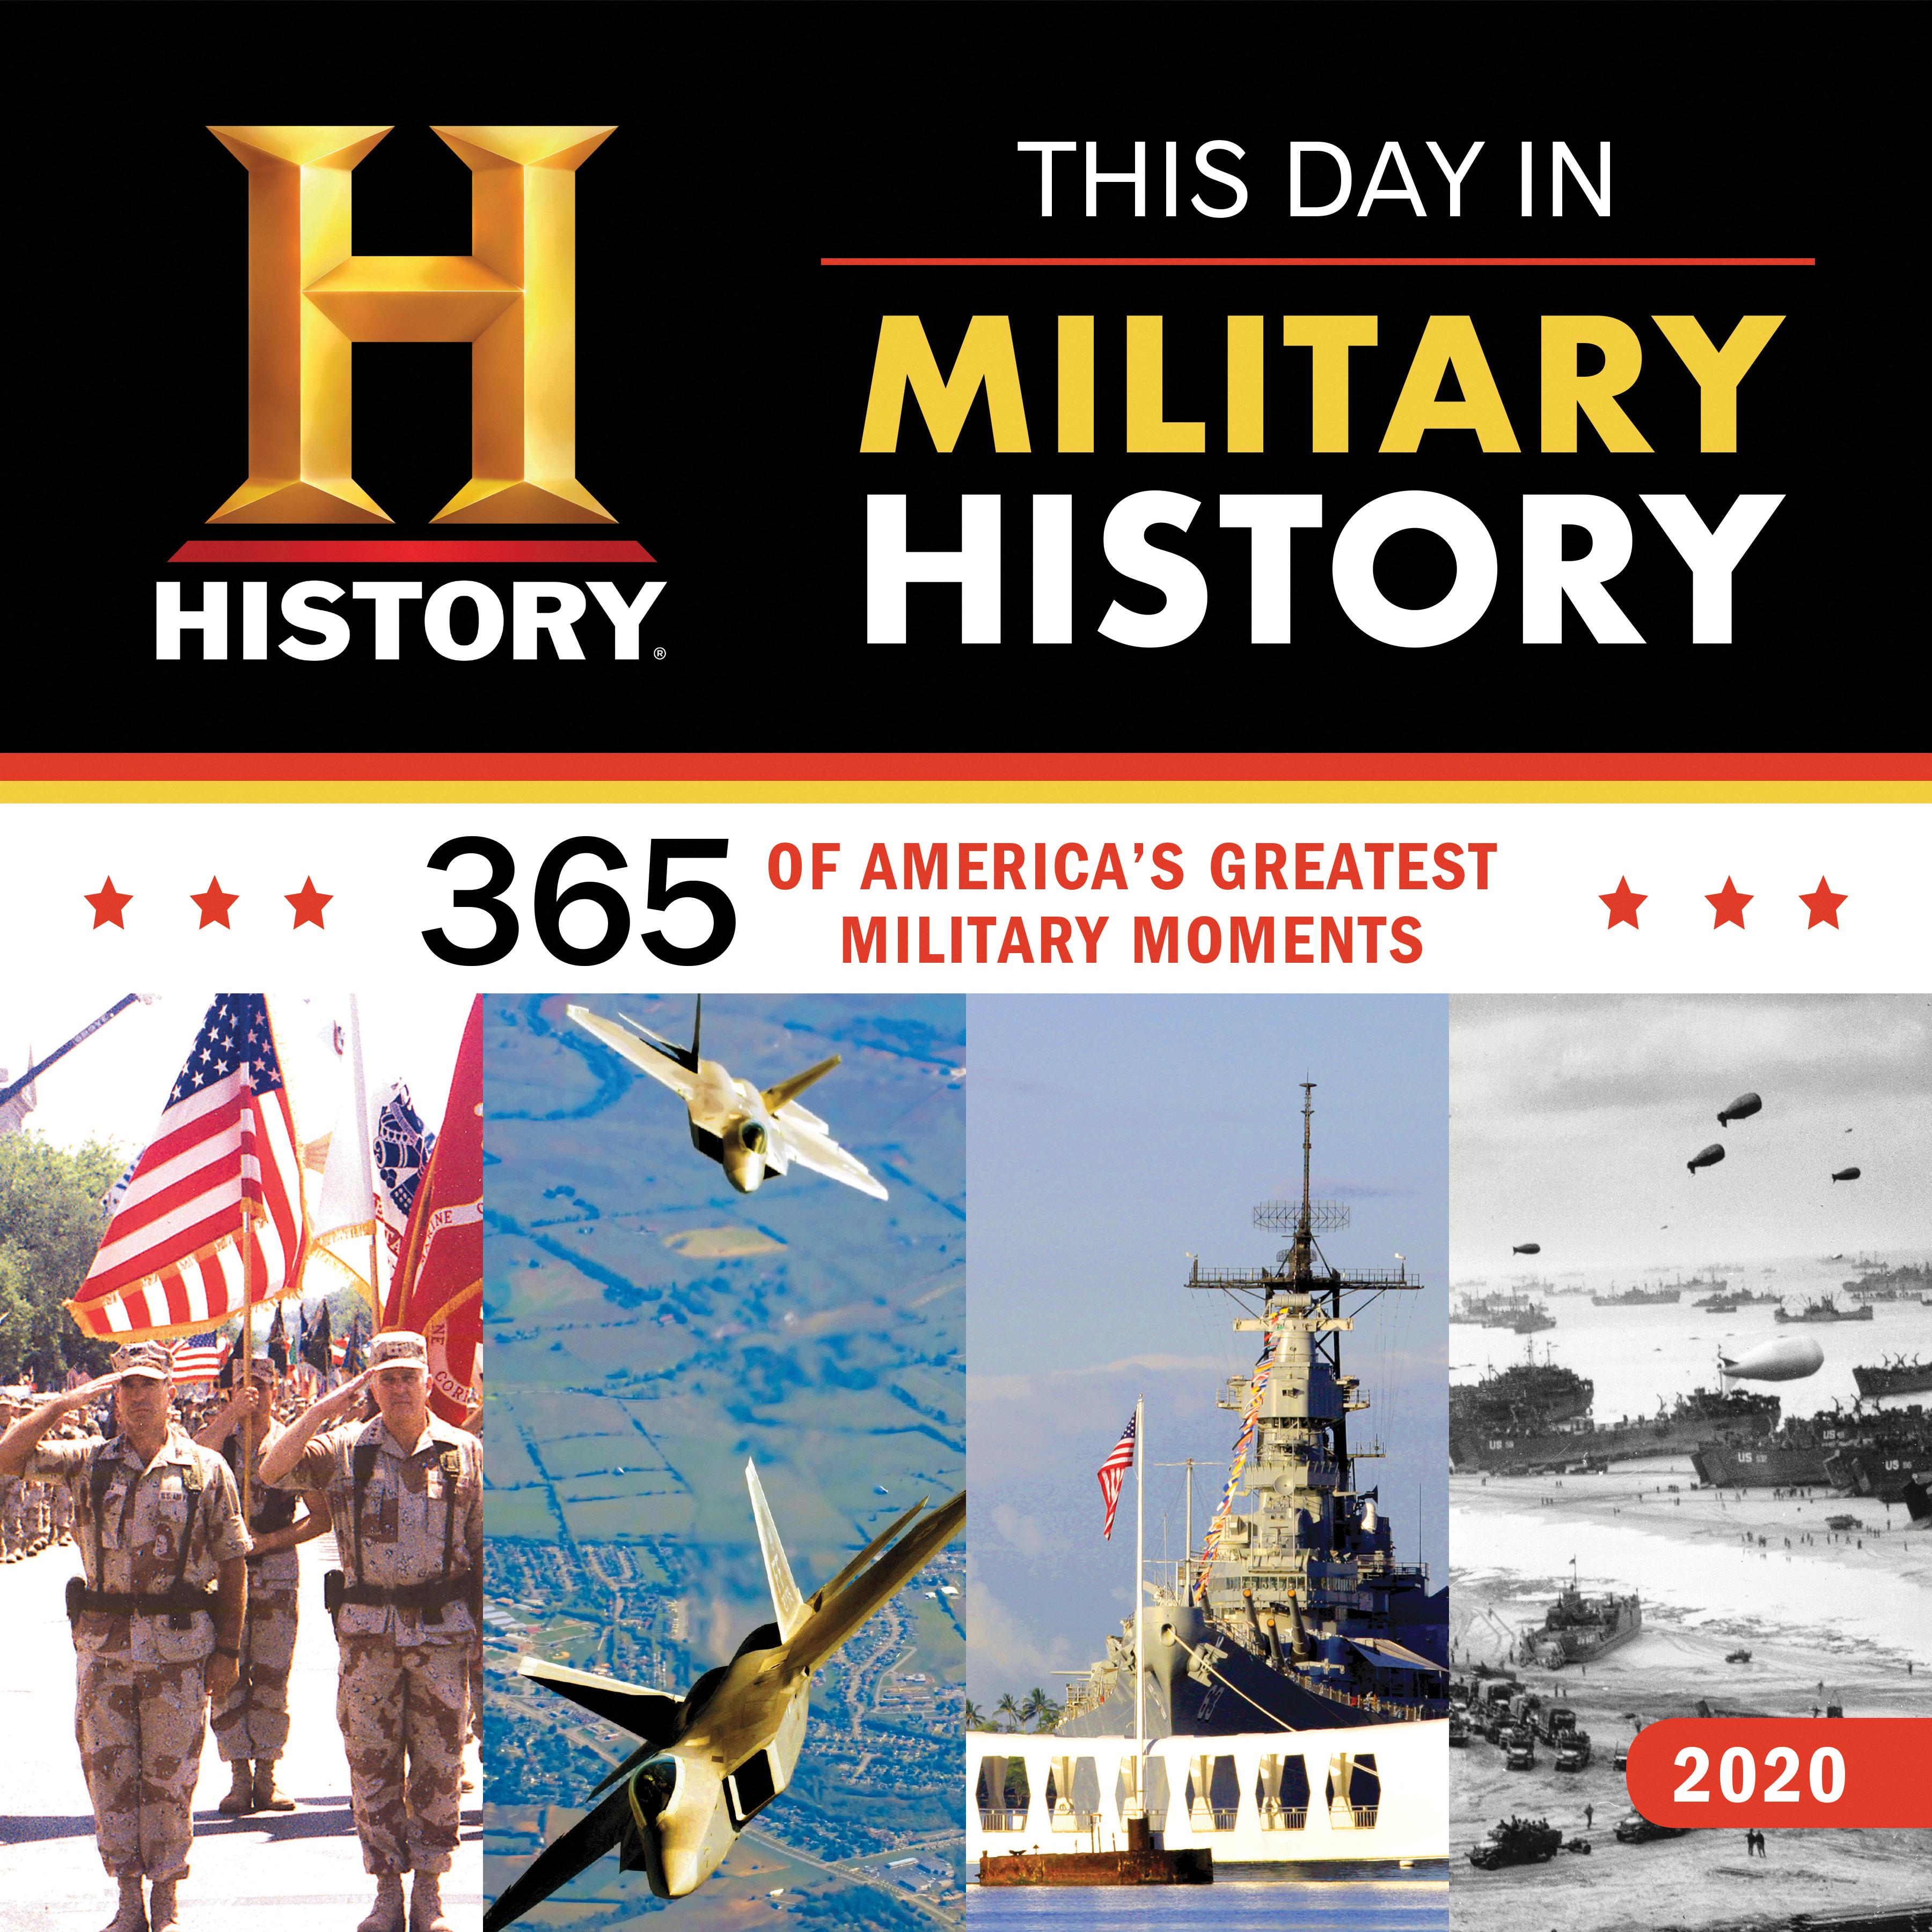 2020-history-channel-this-day-in-military-history-wall-calendar-365-days-of-america-s-greatest